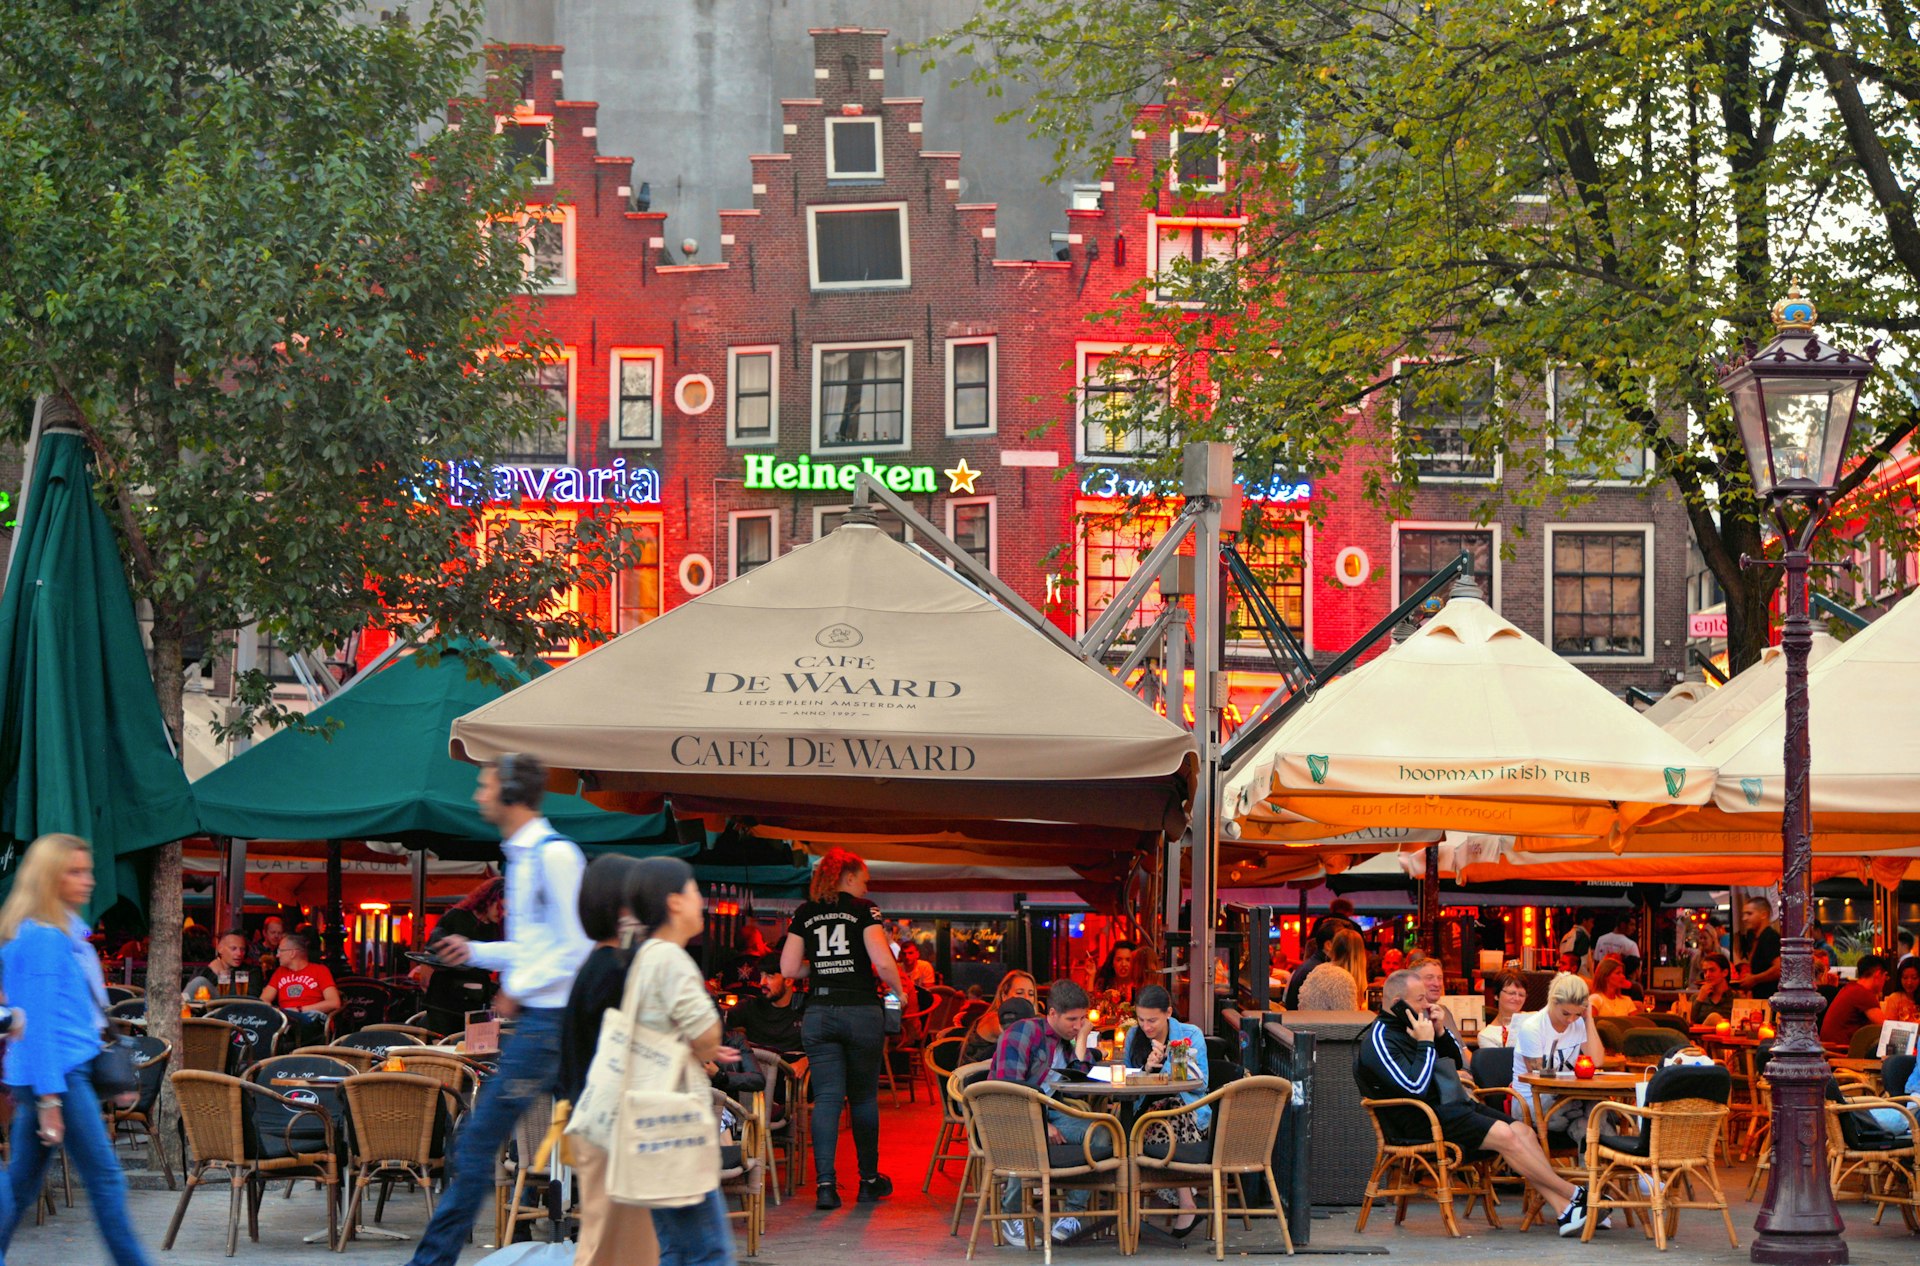 People sat outside at restaurants and bars under awnings in front of traditional Dutch buildings